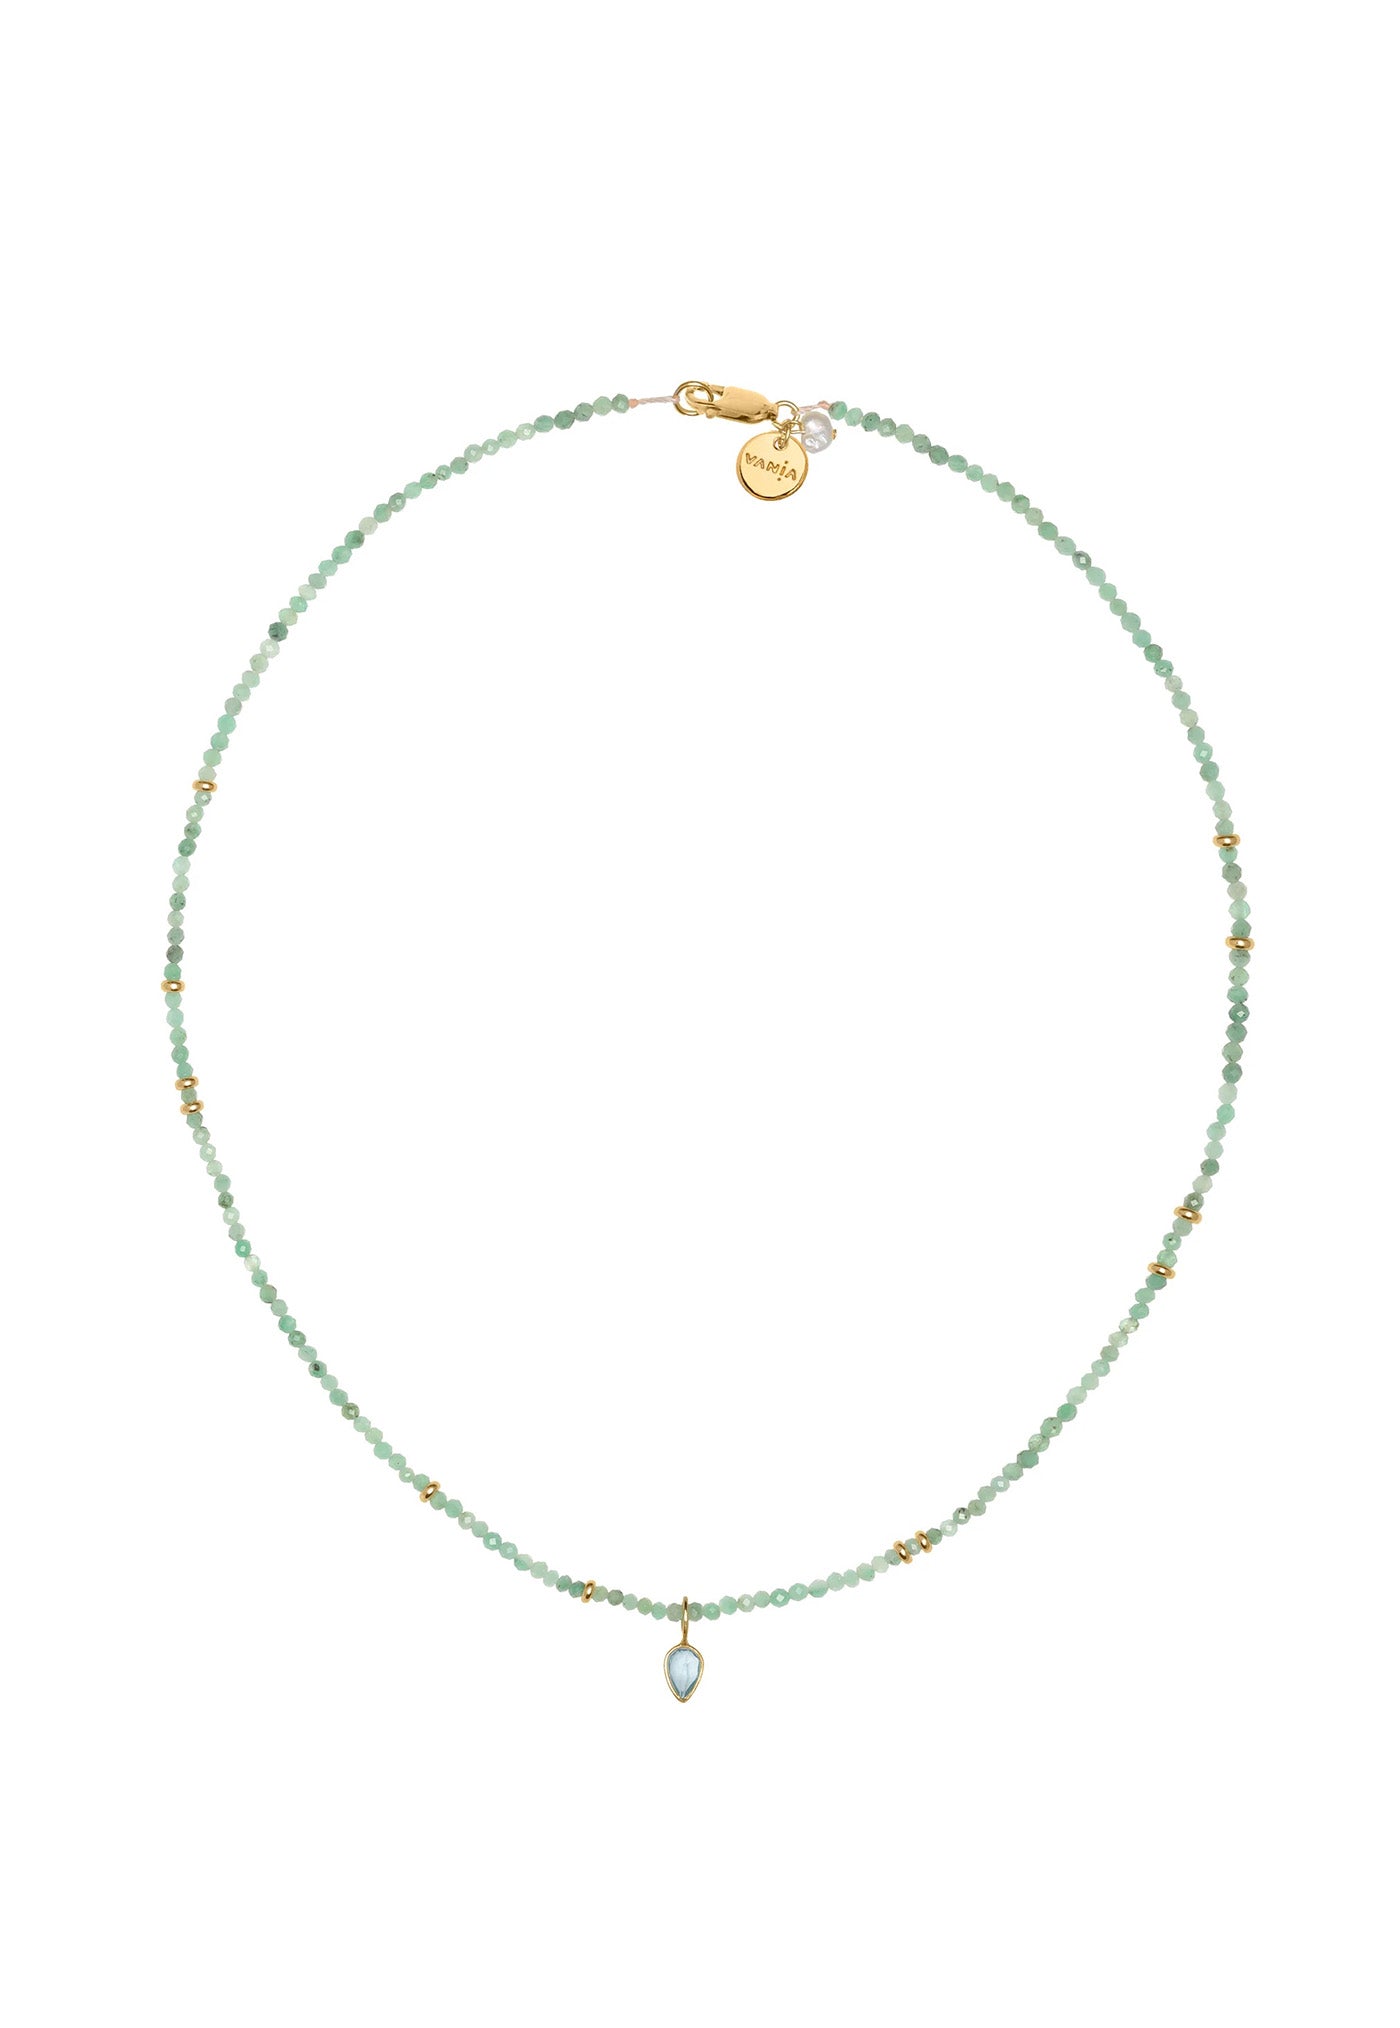 Gleaming Emerald Necklace - Long w/ Topaz Charm sold by Angel Divine